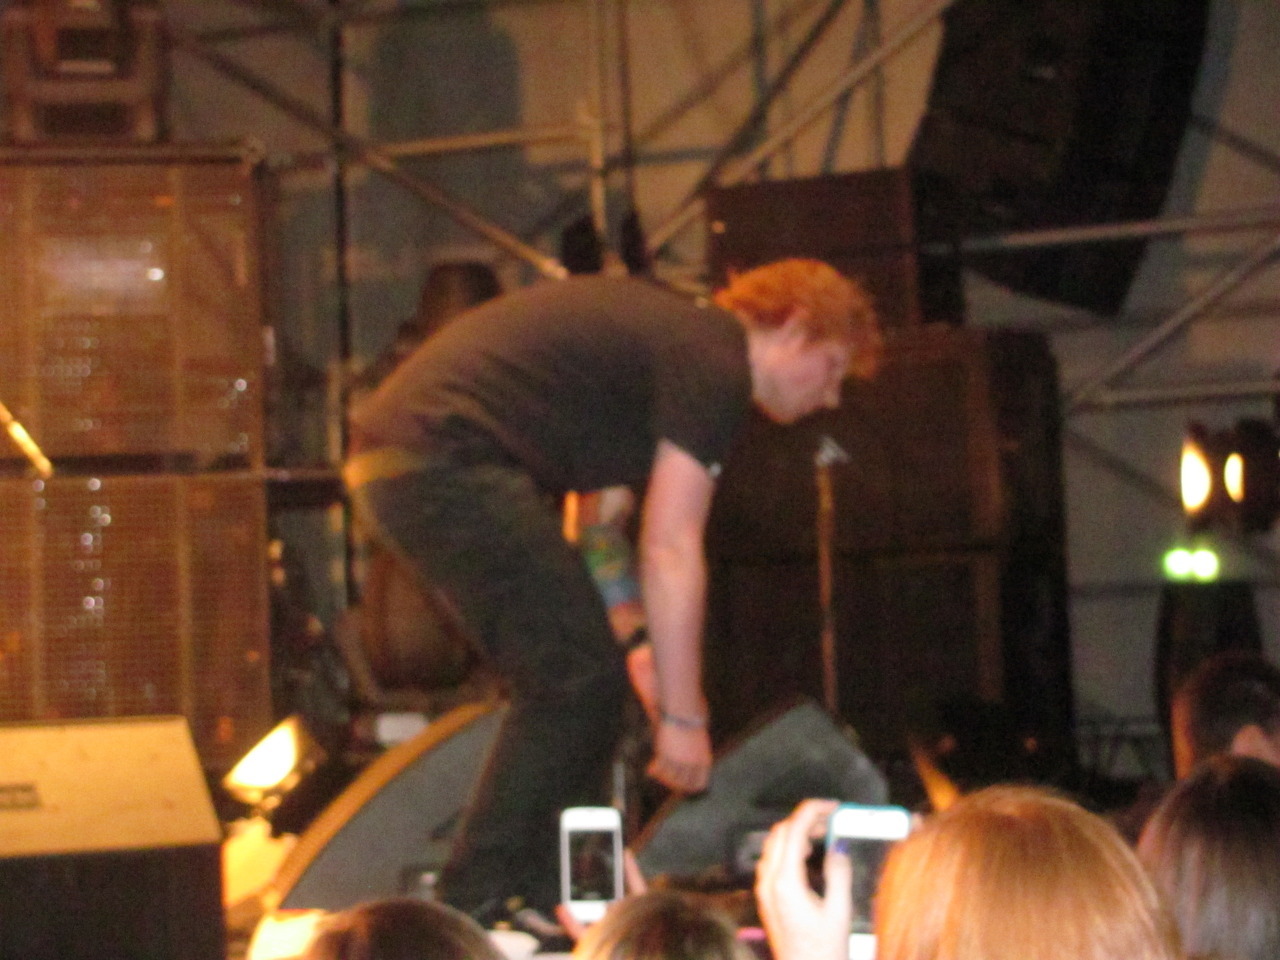 wankcaster:  liamgivesmechestpaynes:  On 9-23-12 Was the Ed Sheeran concert in Philly.